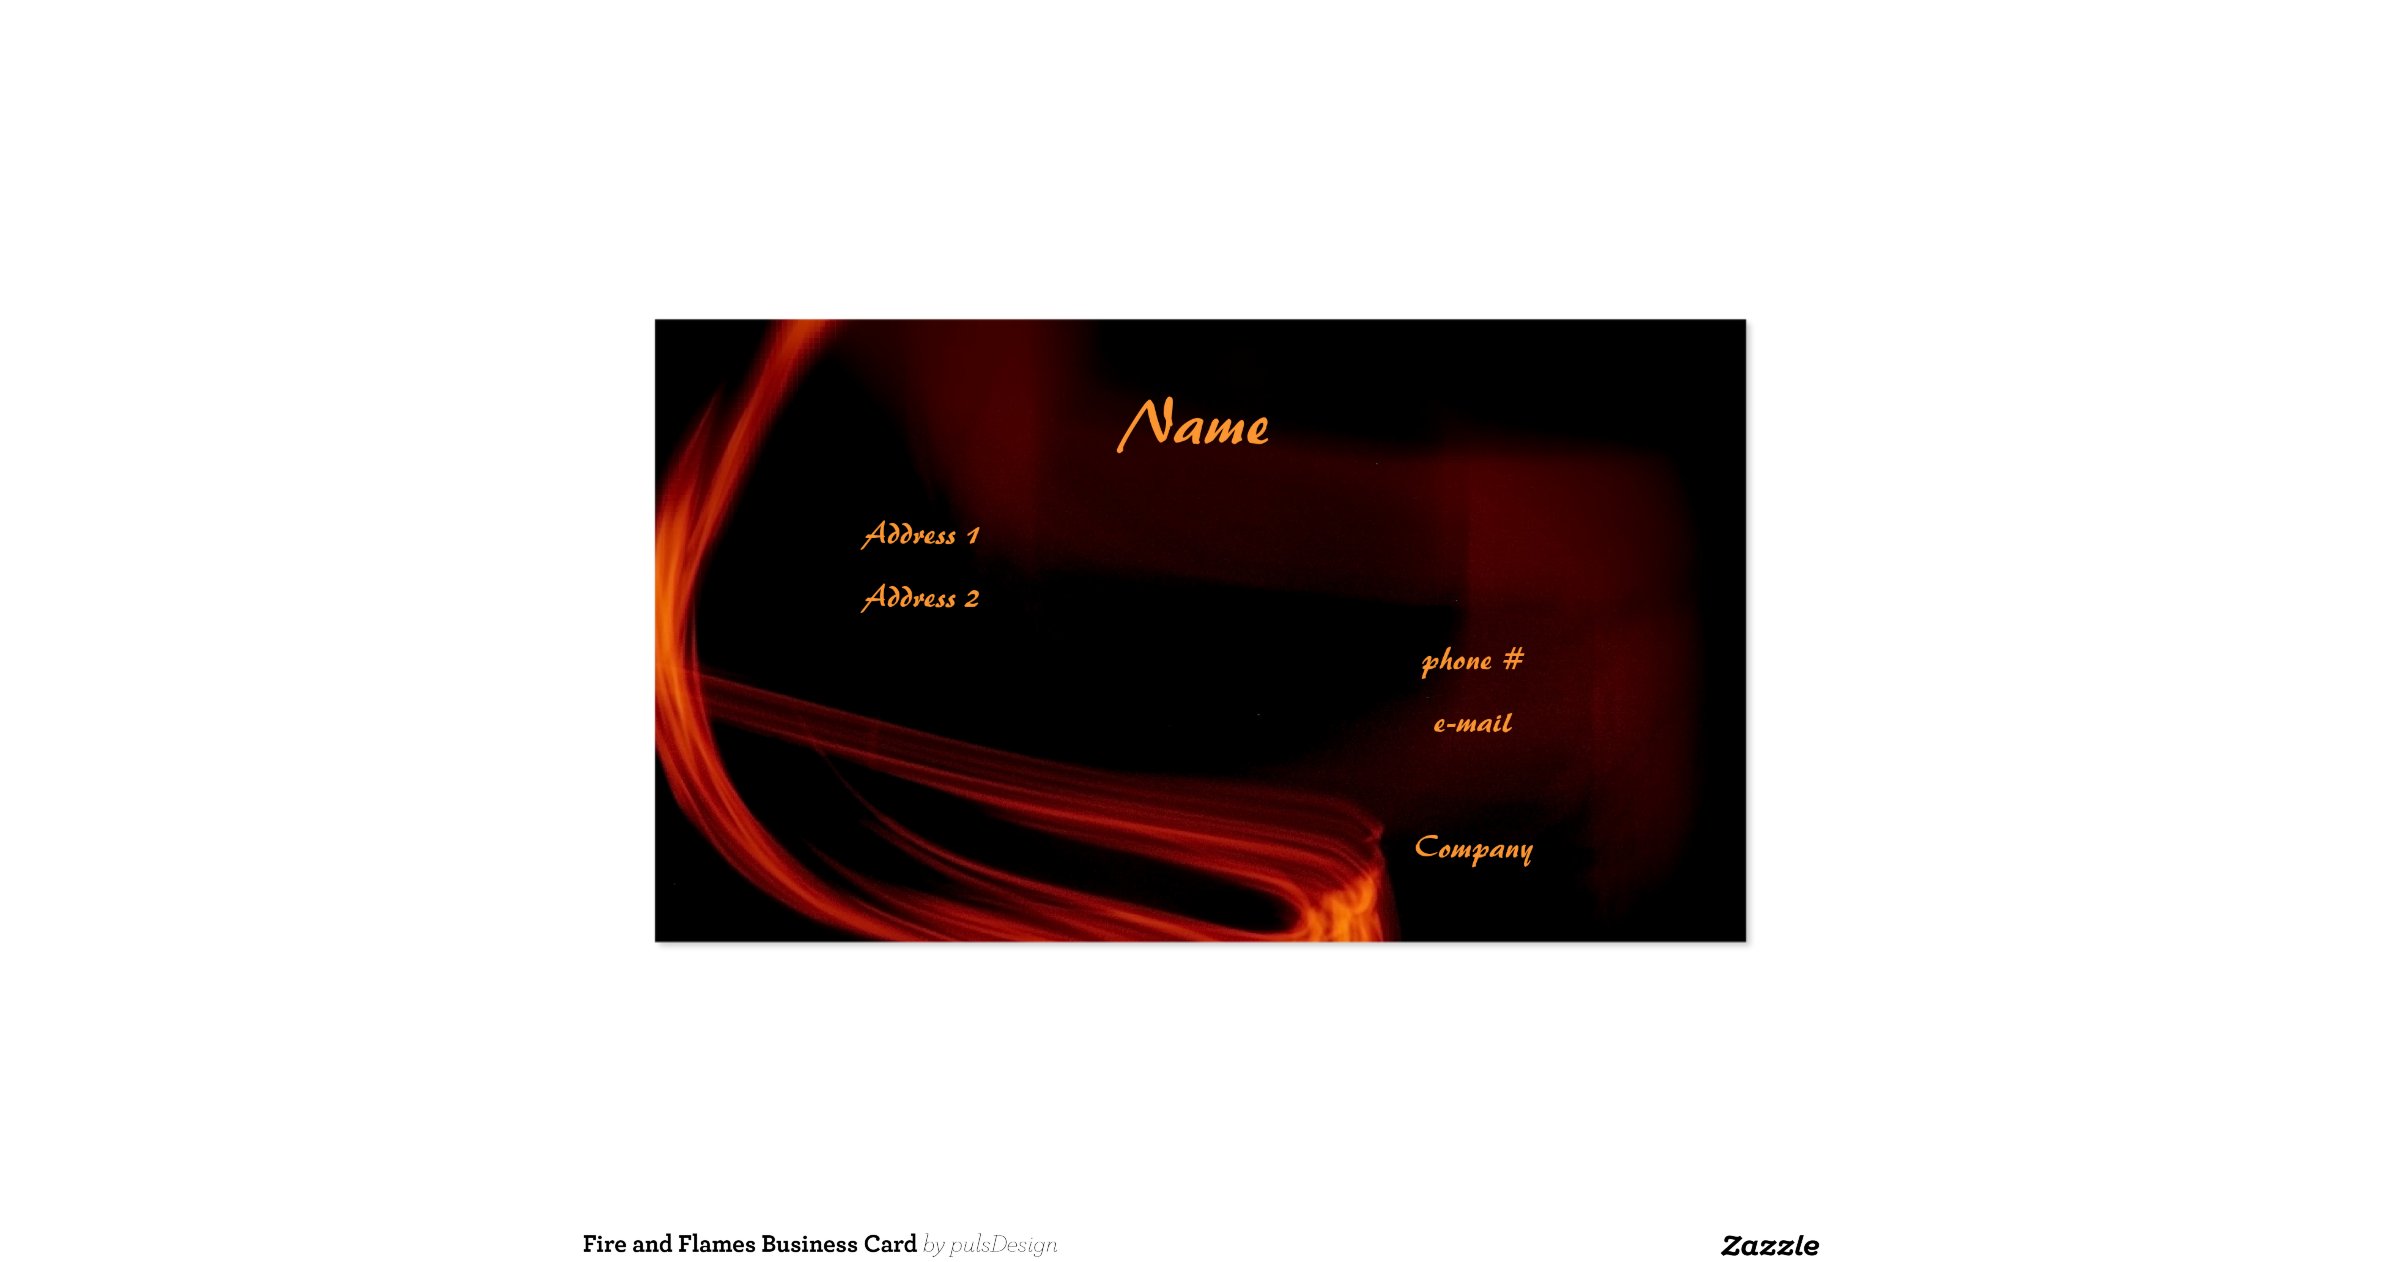 Fire and Flames Business Card | Zazzle